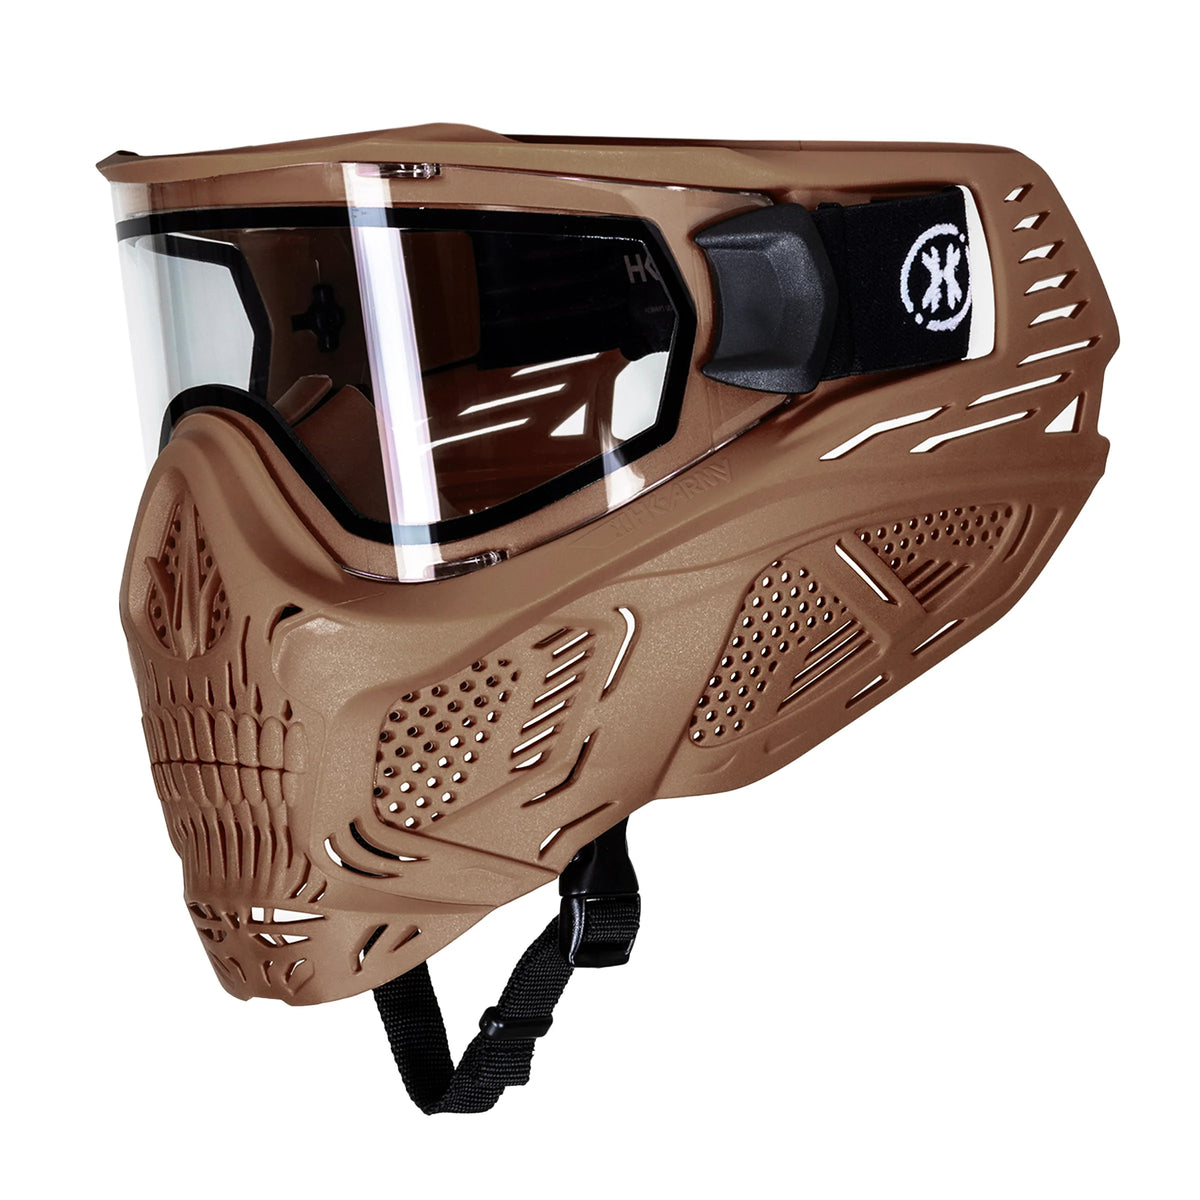 Hstl Skull Goggle - Tan W/ Clear Lens | Paintball Goggle | Mask | Hk Army